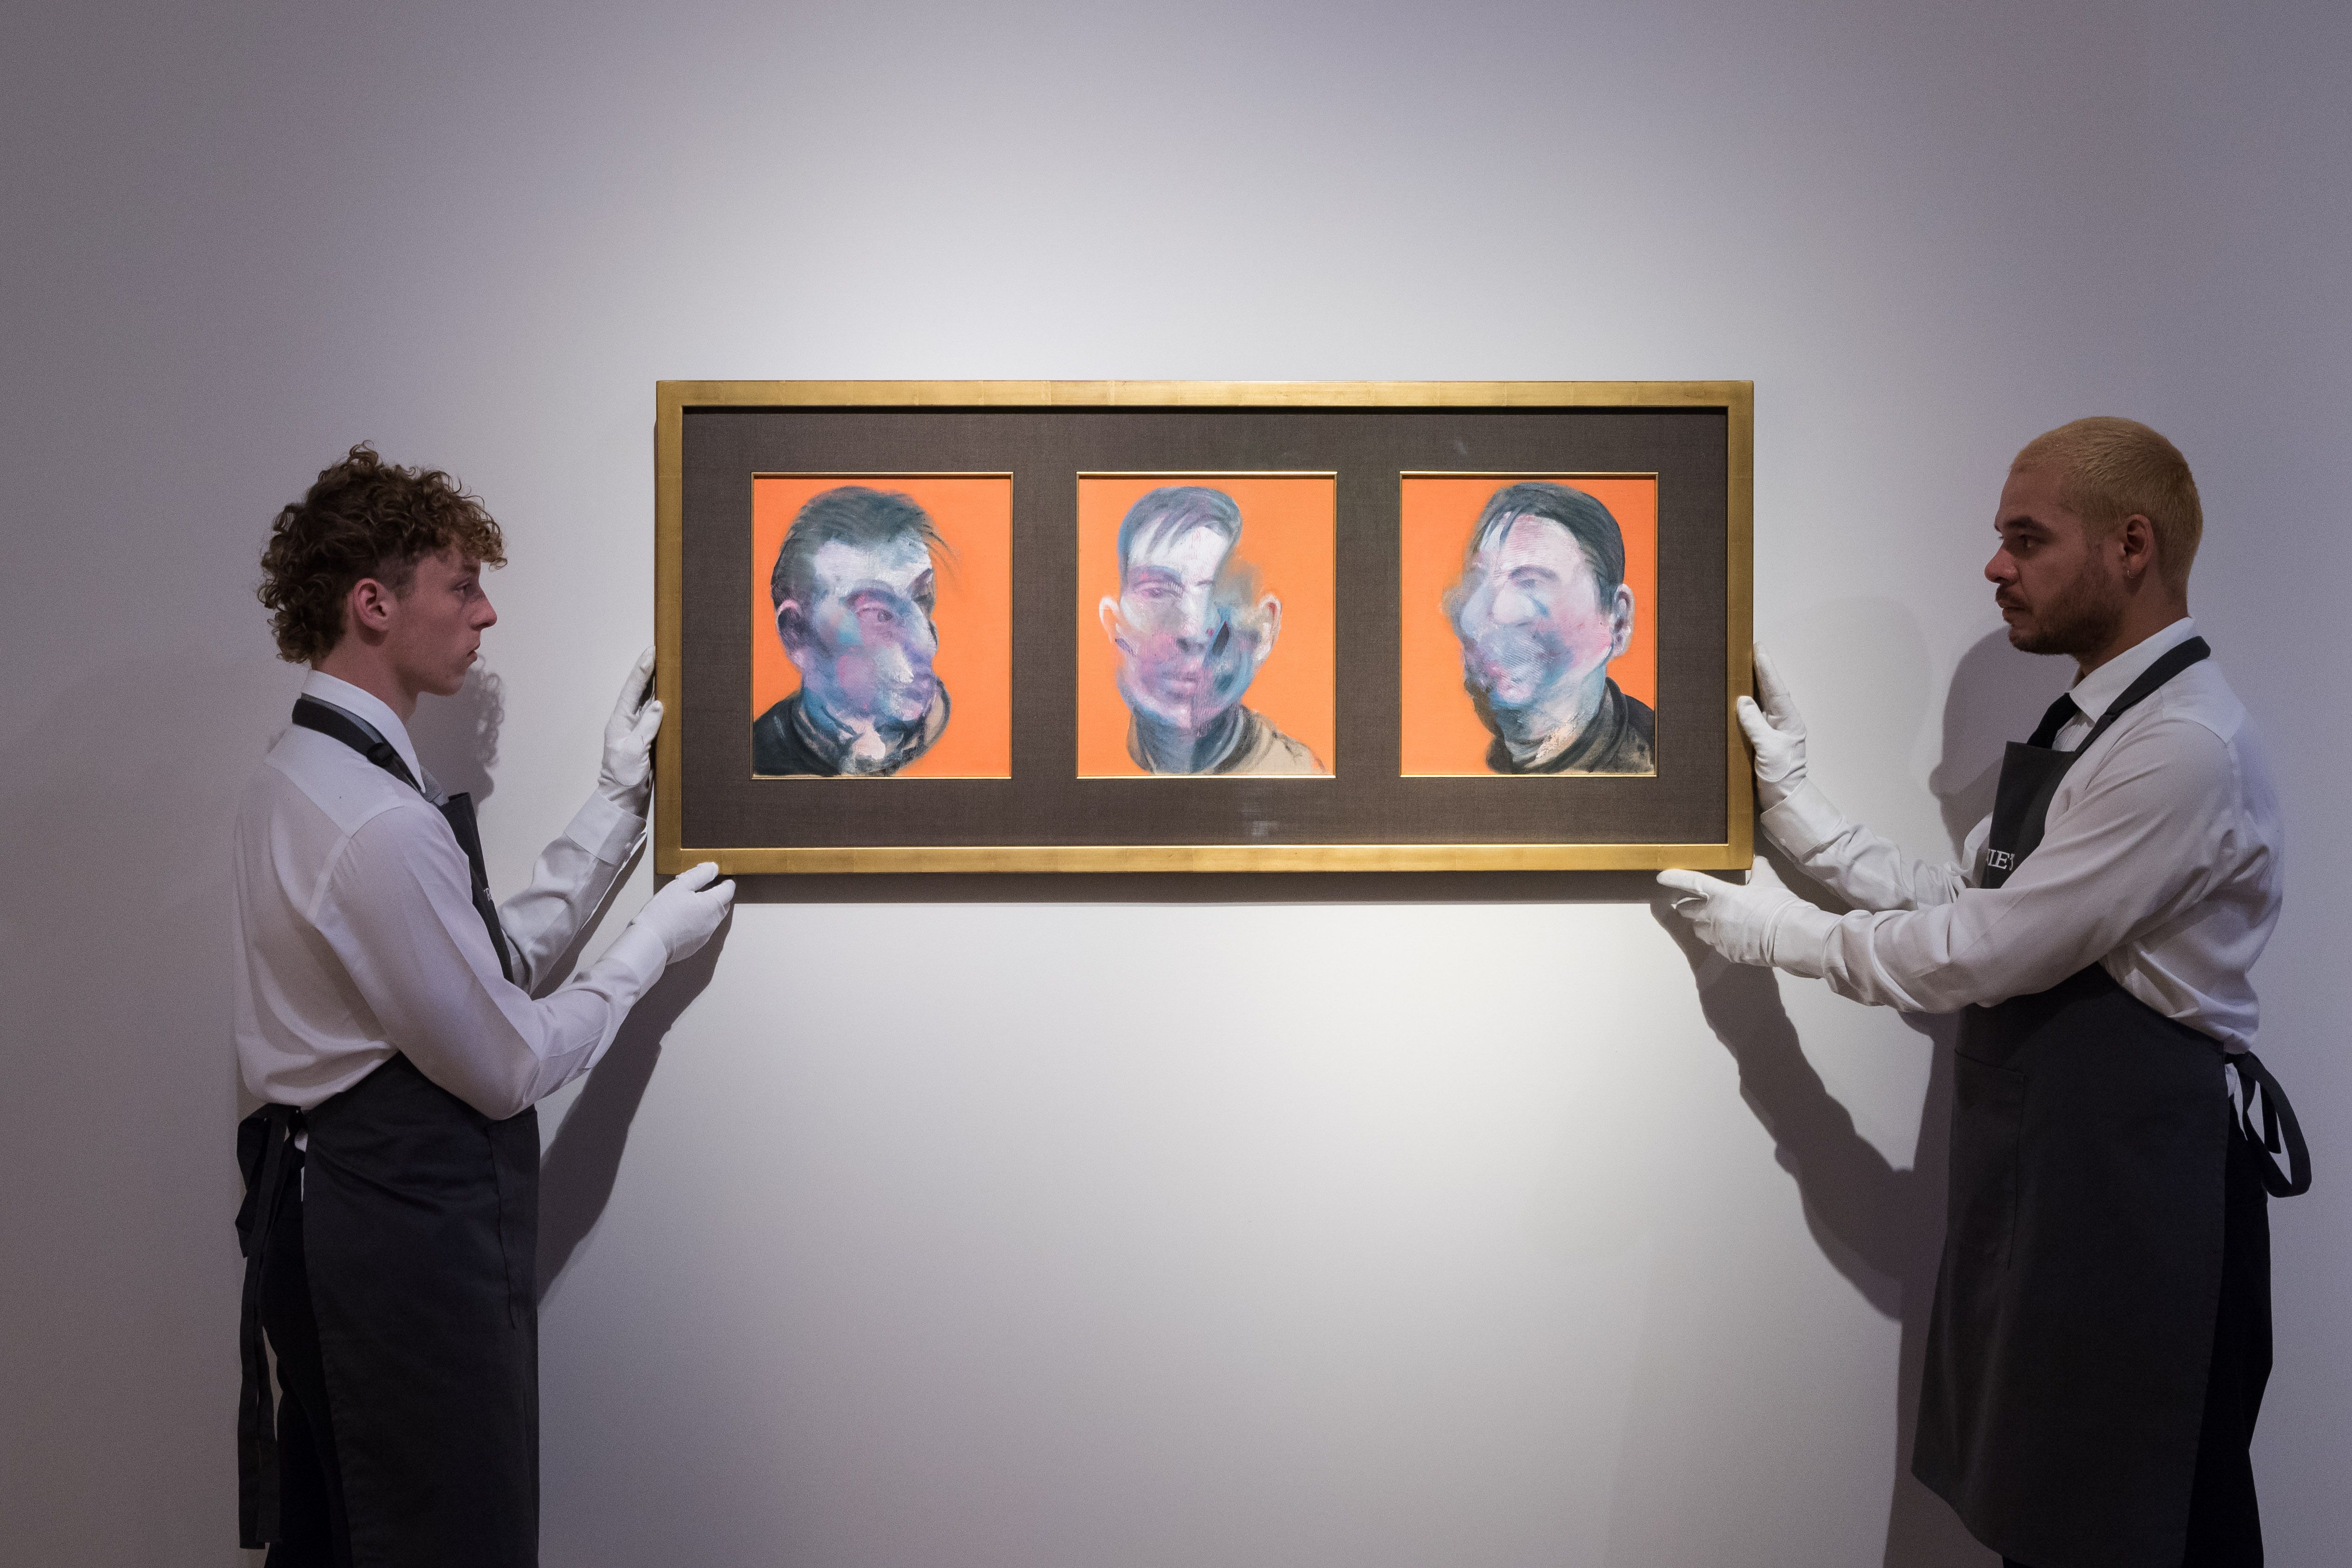 A painting titled 'Three Studies for Self-Portrait' by Francis Bacon.